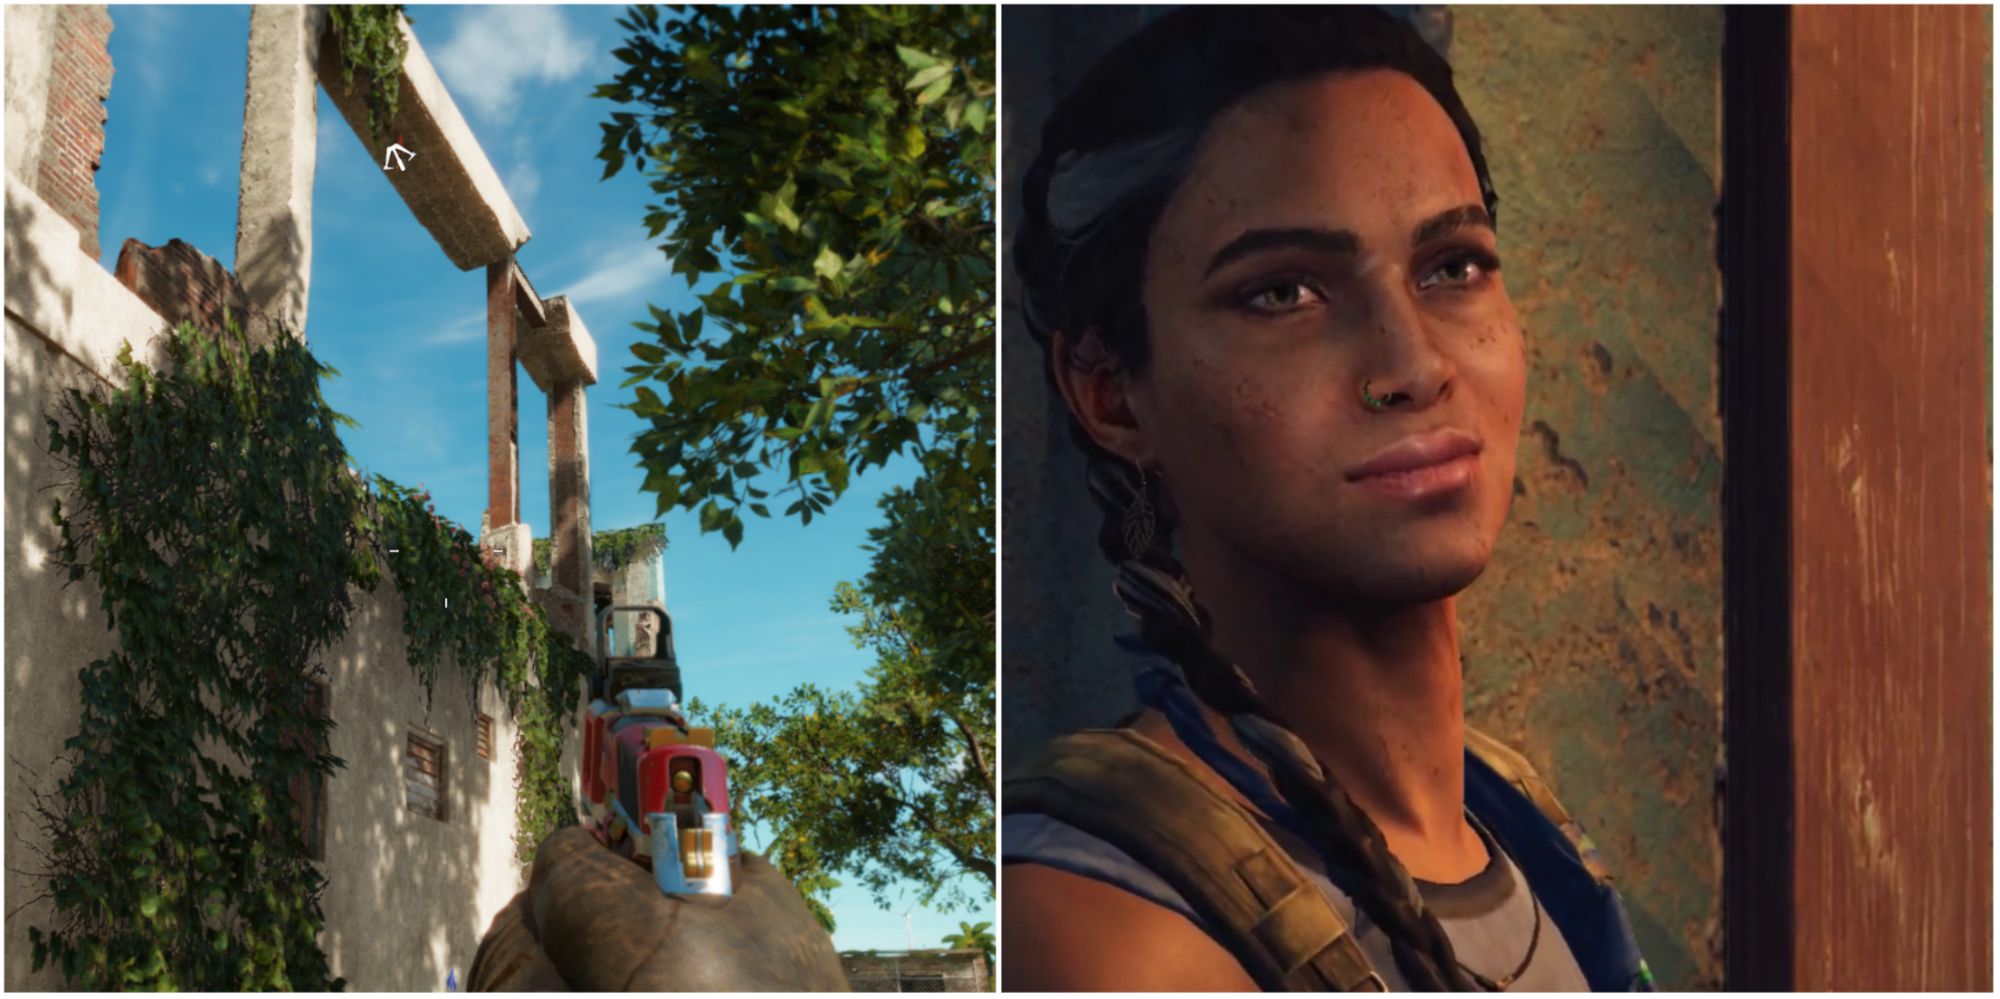 Far Cry 6 Against The Wall Featured Split Image Grapple and Clara